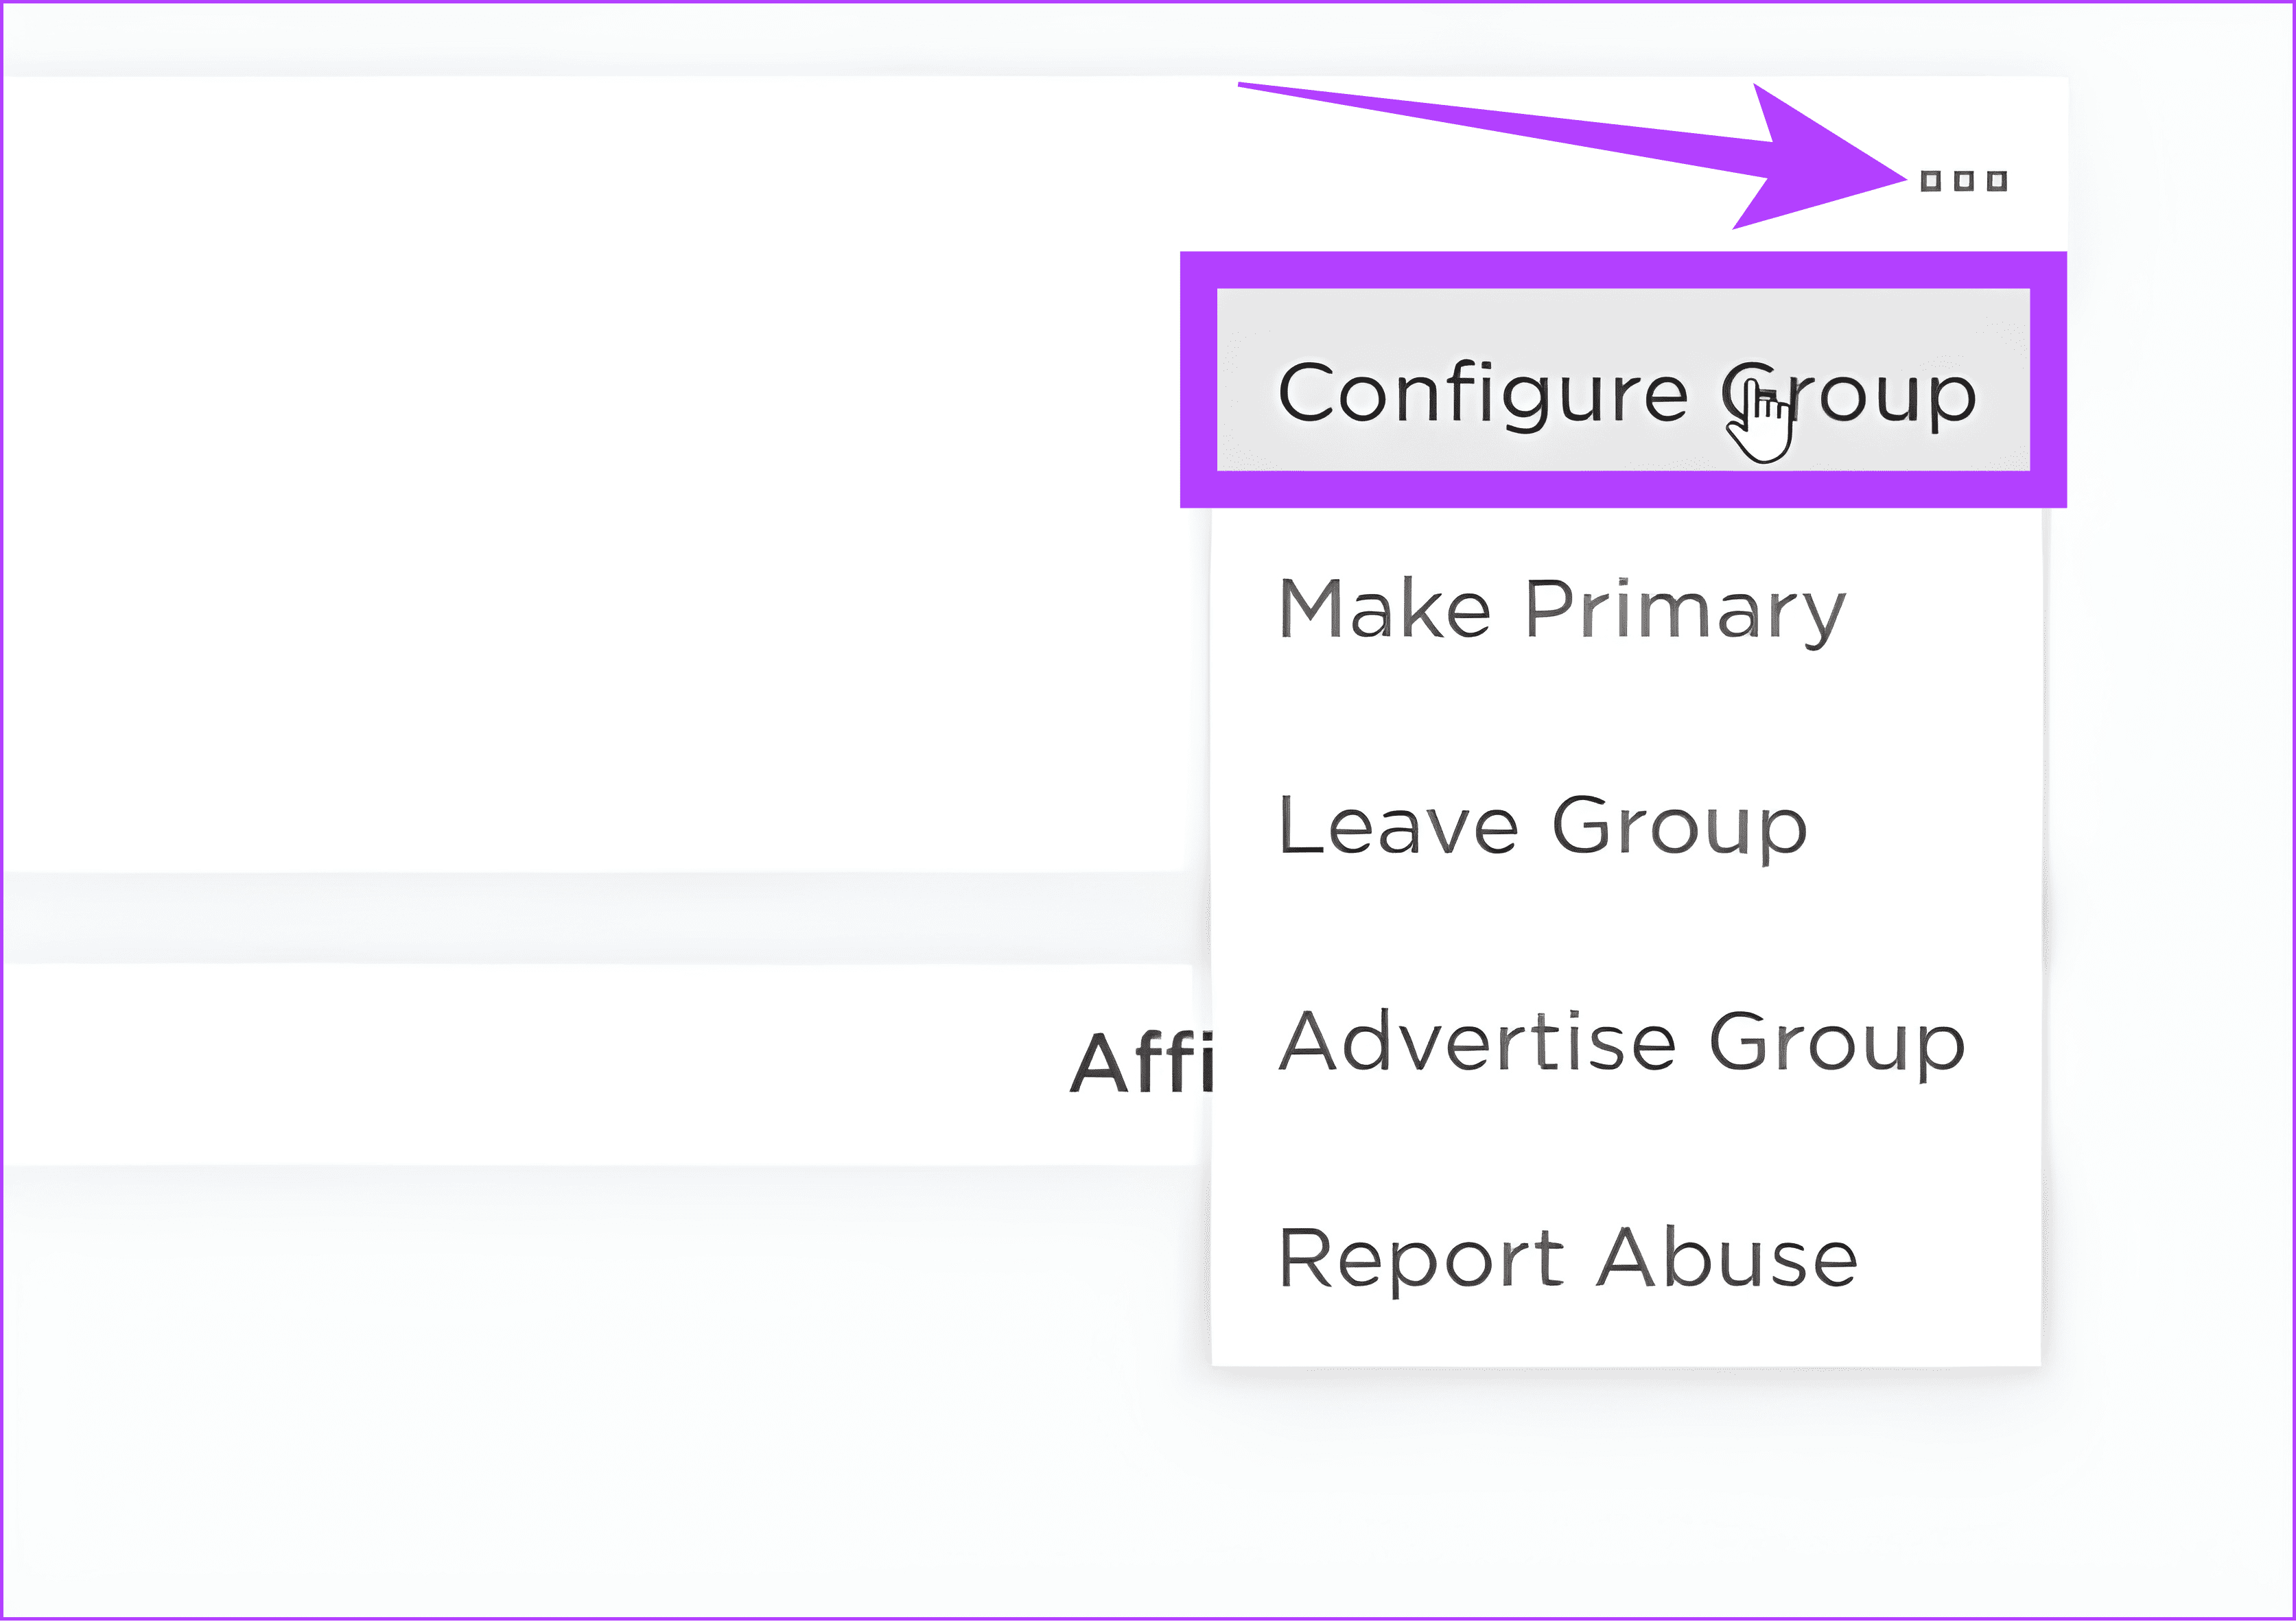 Click the three dots at the top right corner and choose Configure Group